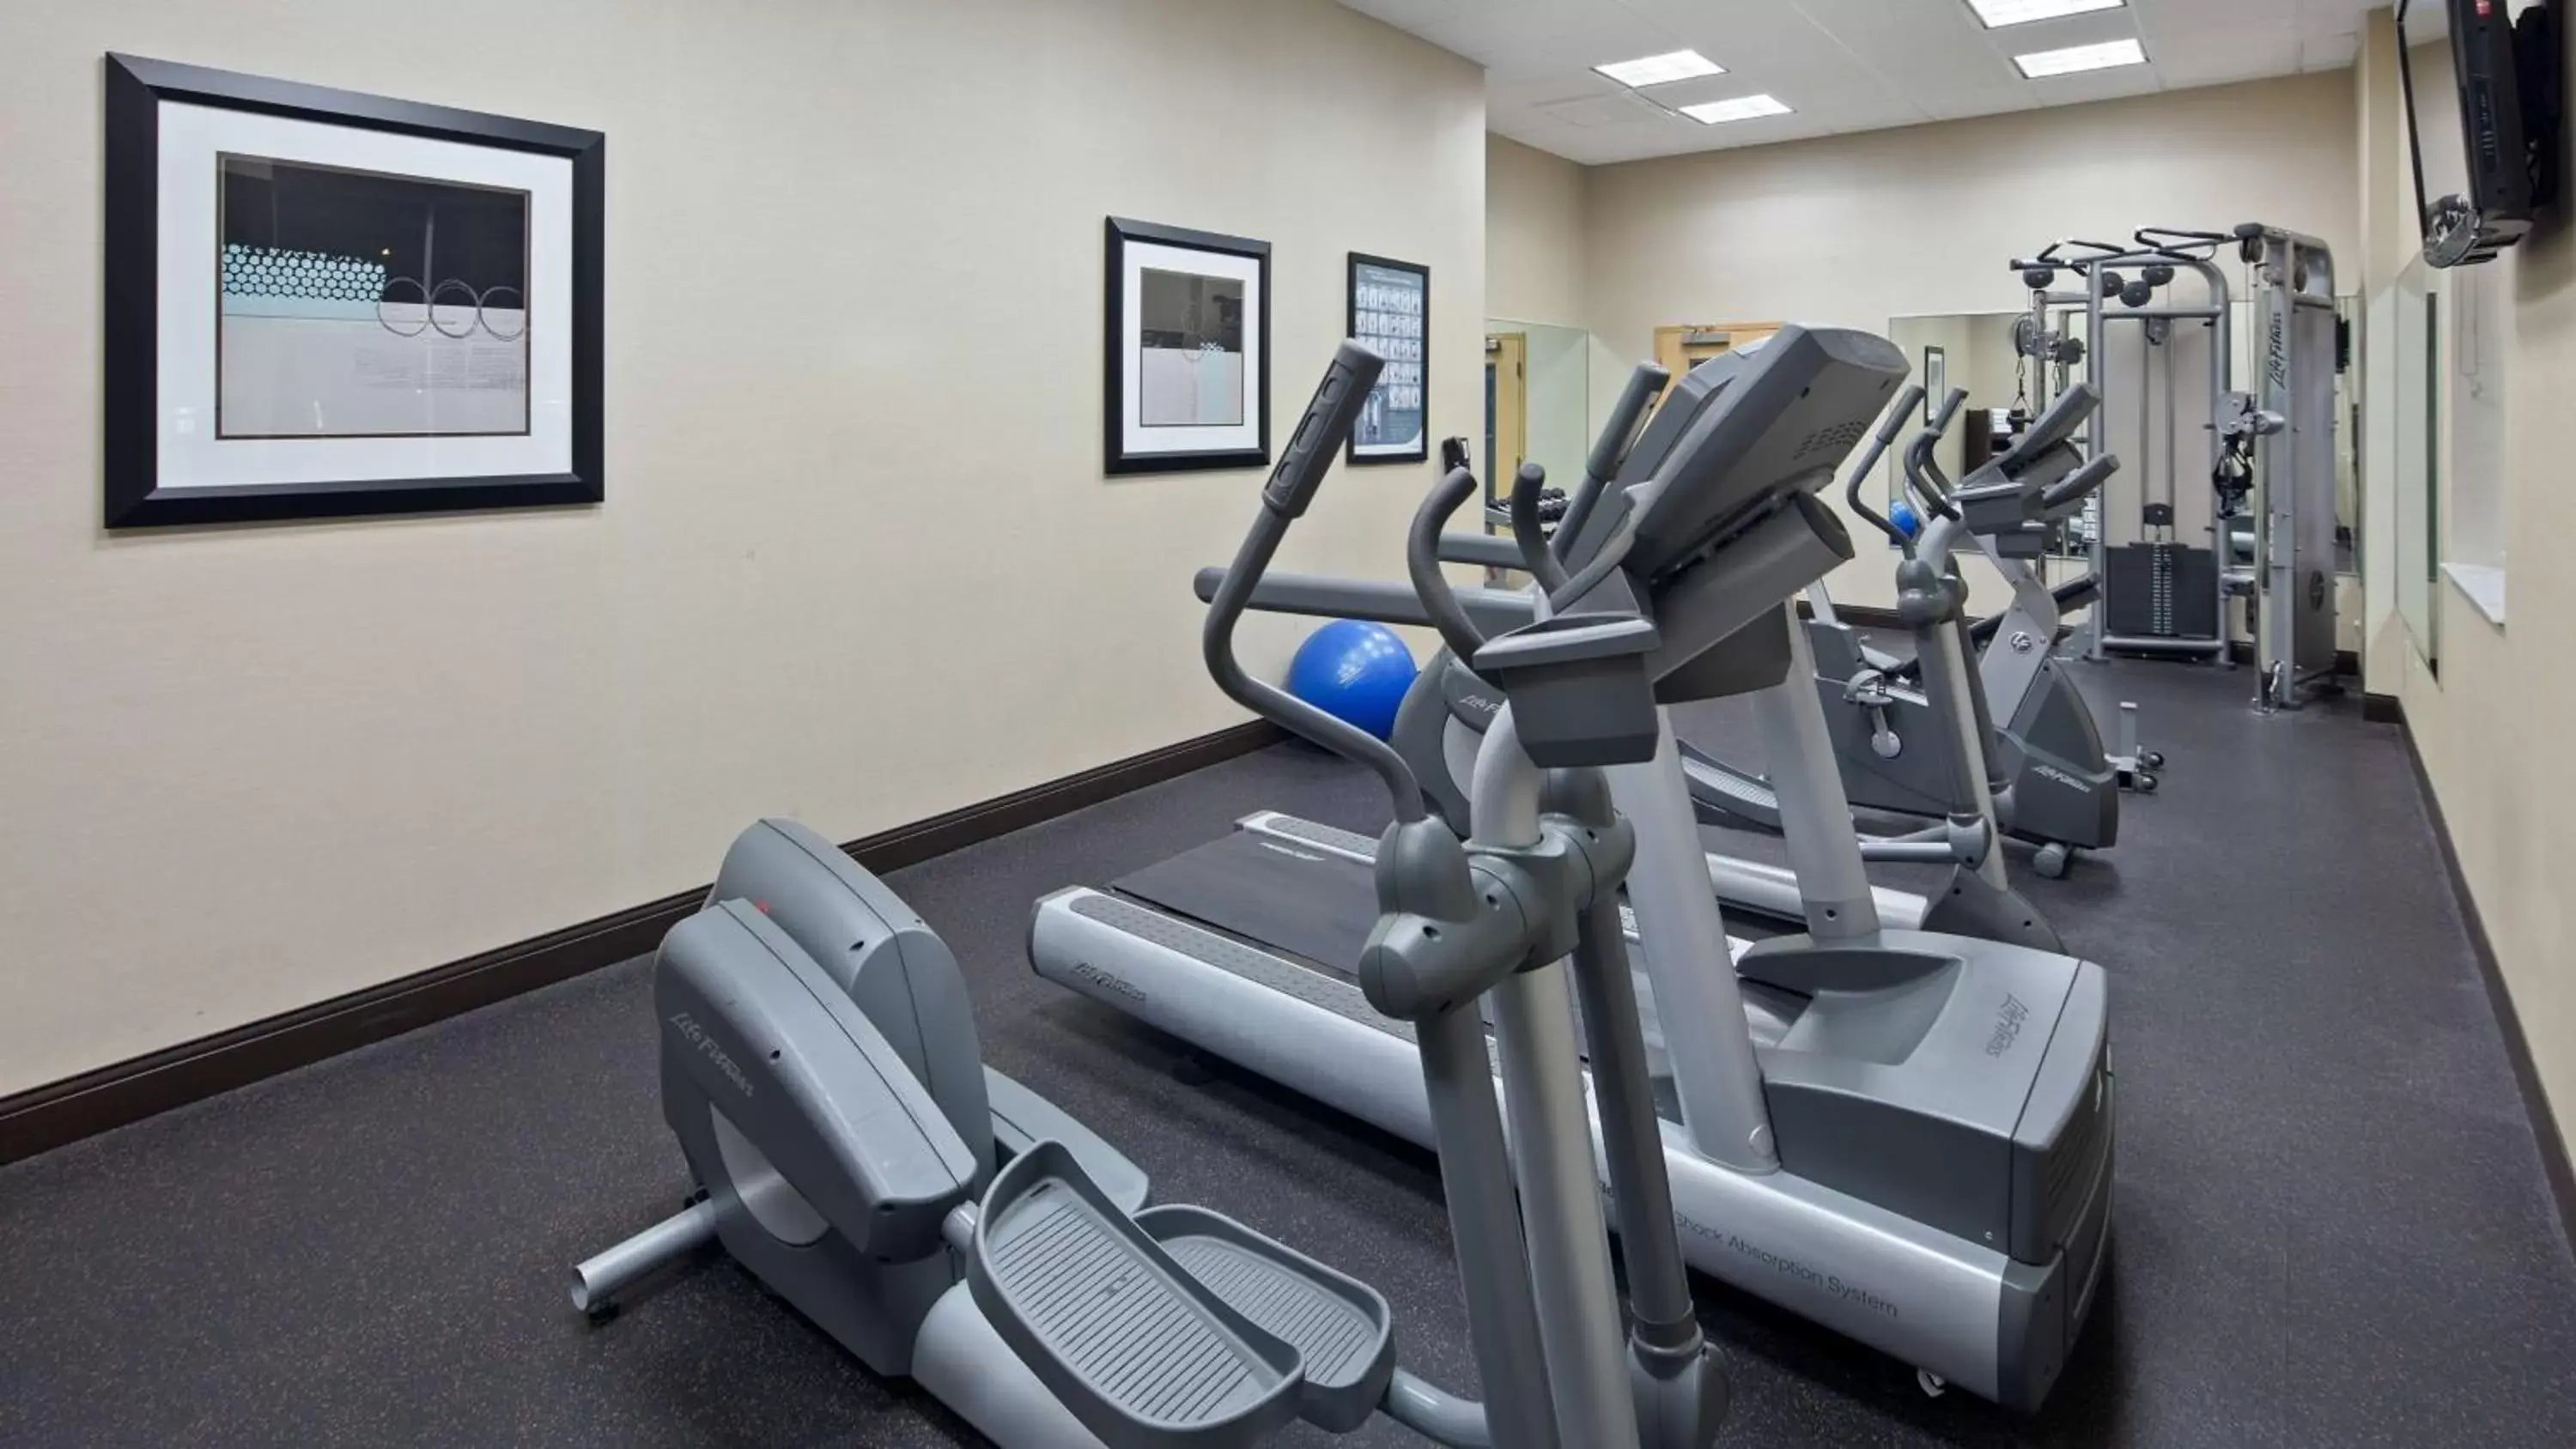 Fitness centre/facilities, Fitness Center/Facilities in Best Western Premier Miami International Airport Hotel & Suites Coral Gables